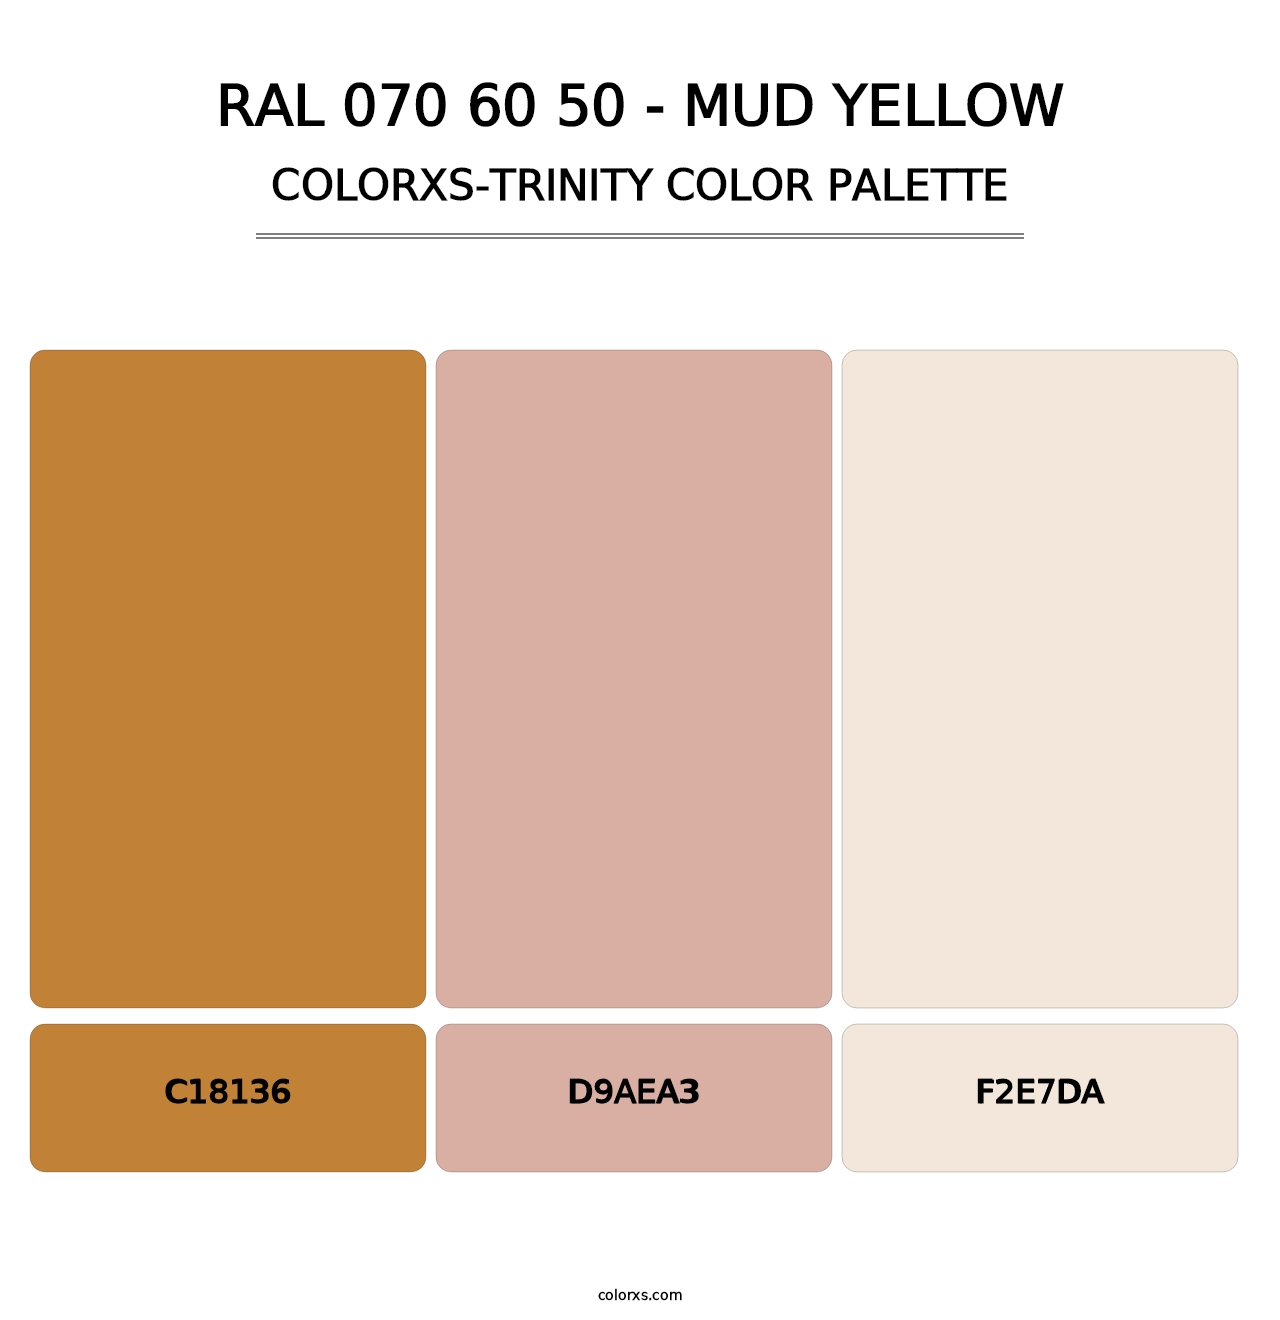 RAL 070 60 50 - Mud Yellow - Colorxs Trinity Palette